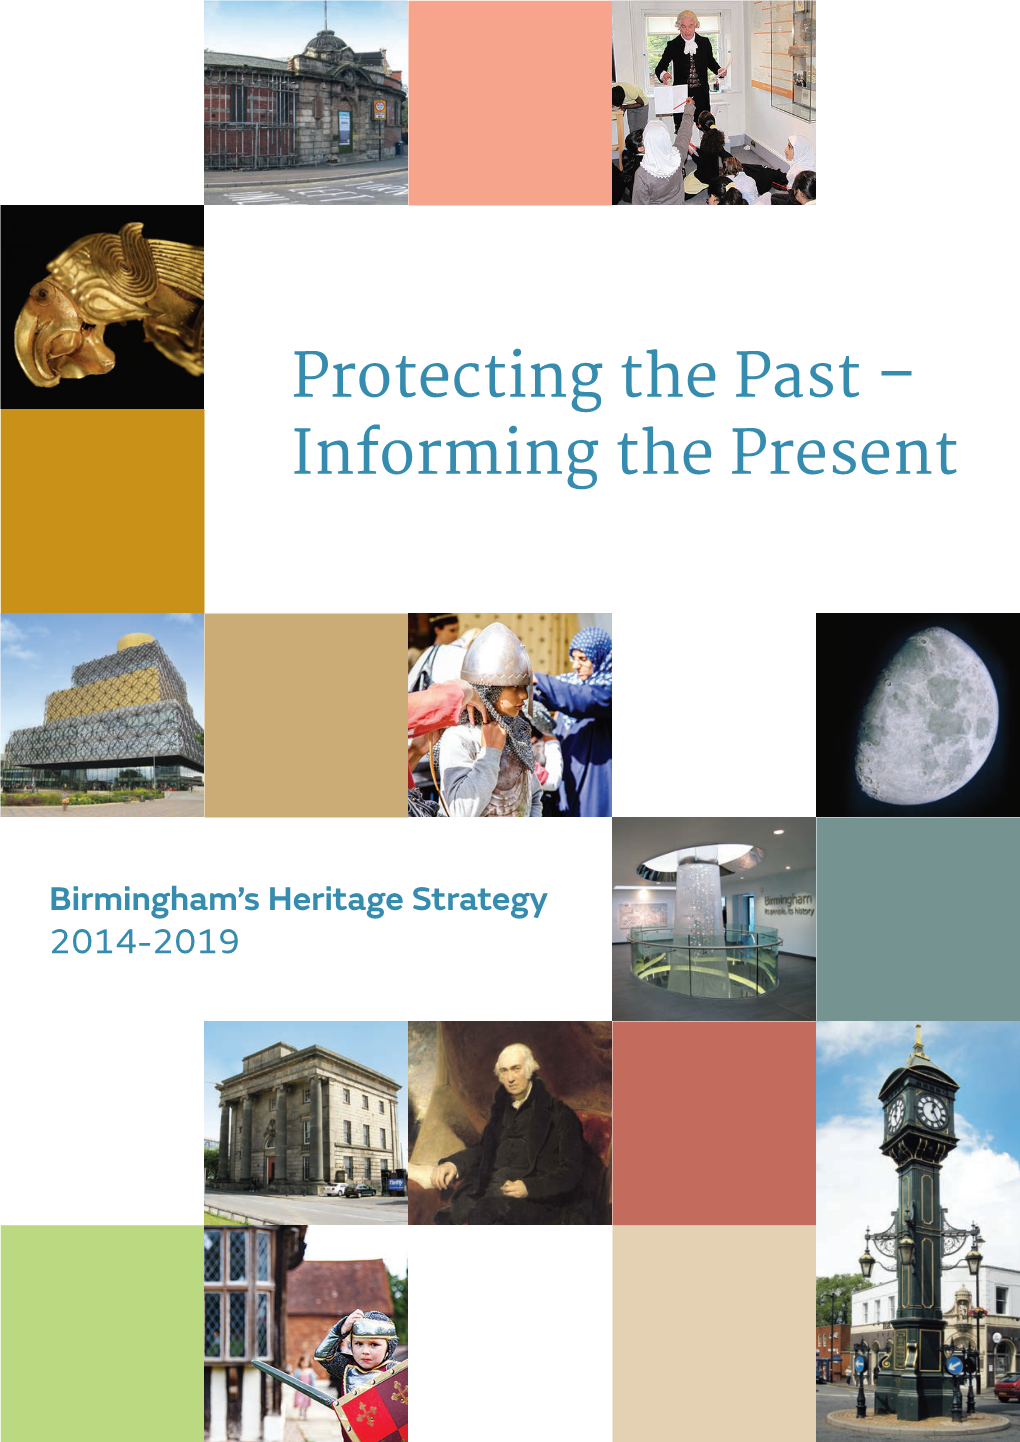 Protecting the Past – Informing the Present